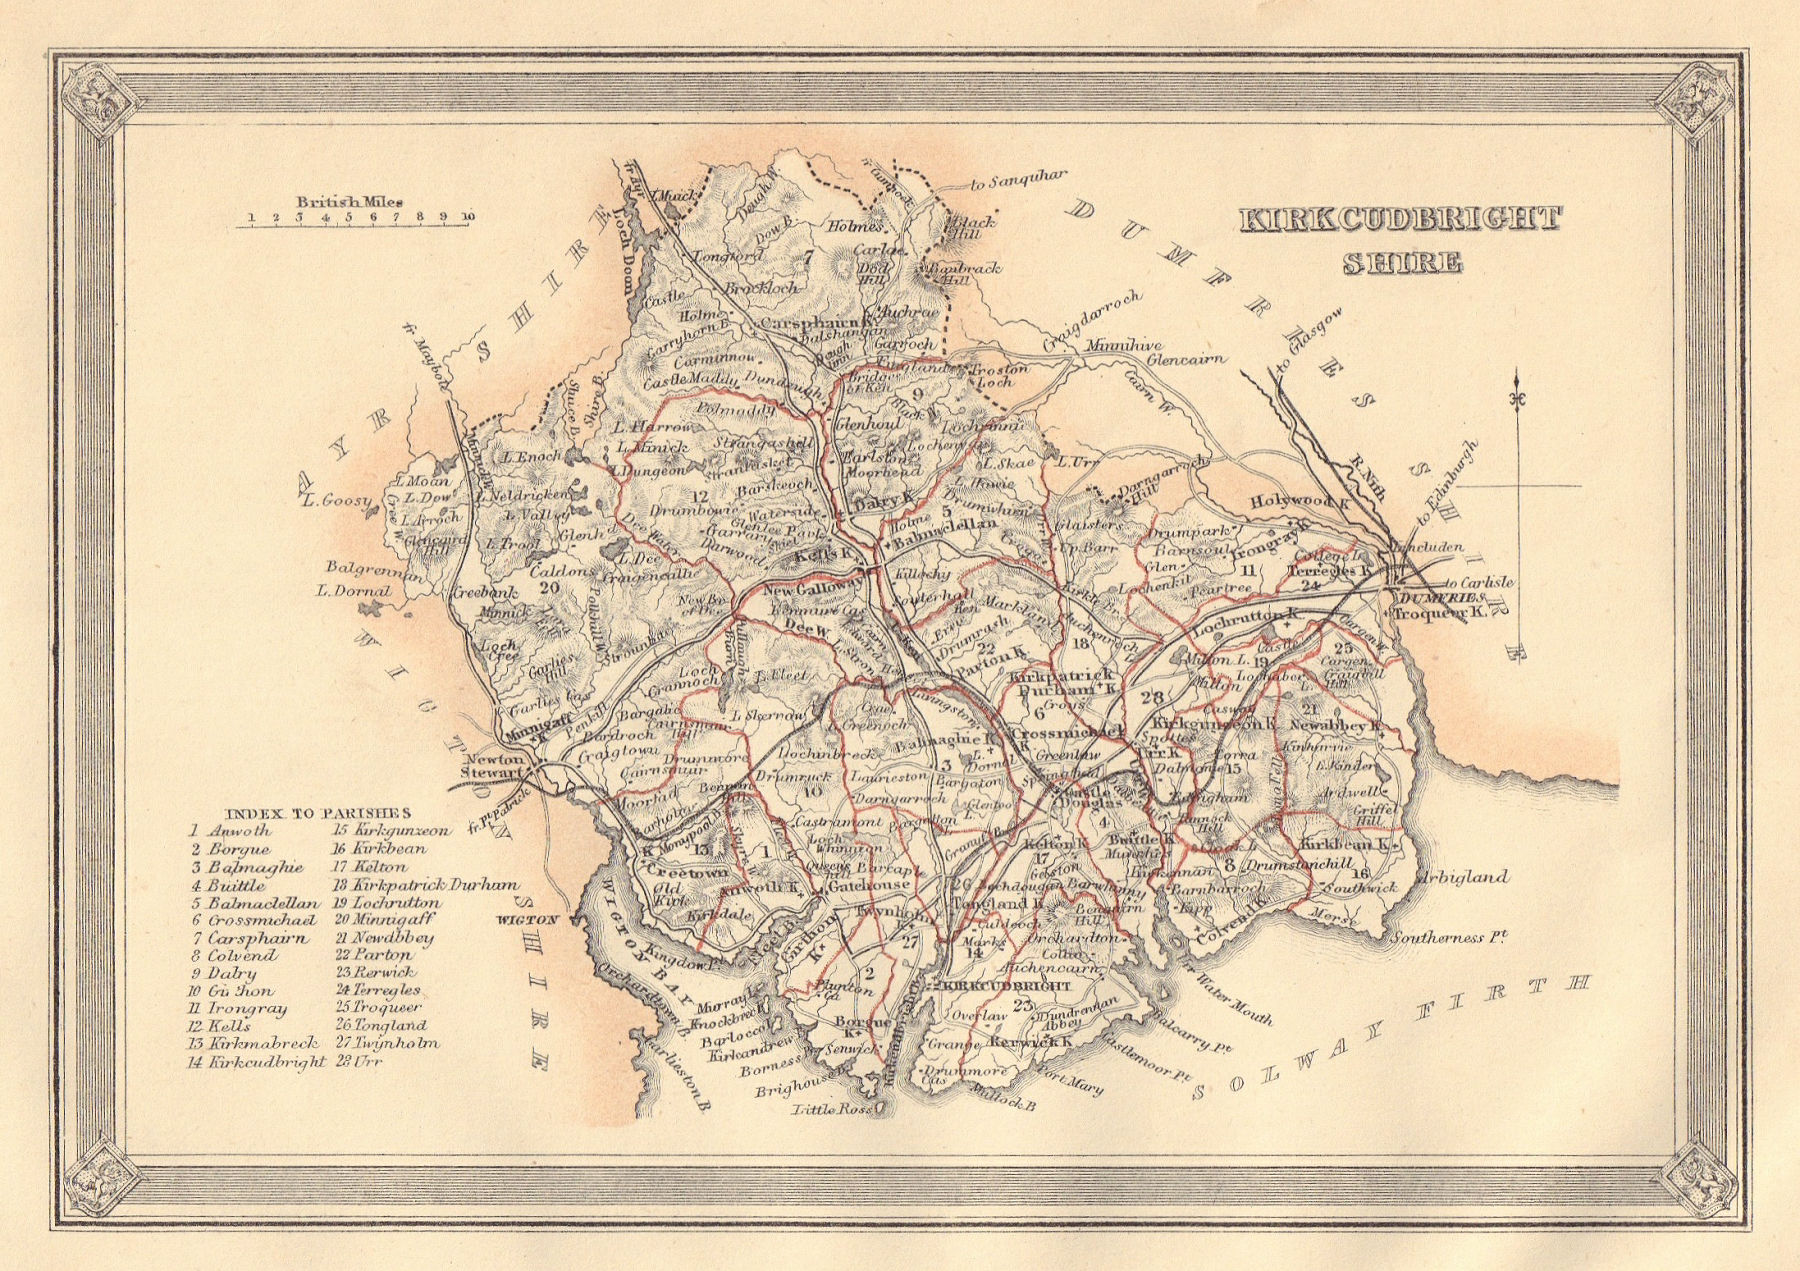 Associate Product Decorative antique county map of Kirkcudbrightshire. FULLARTON 1866 old